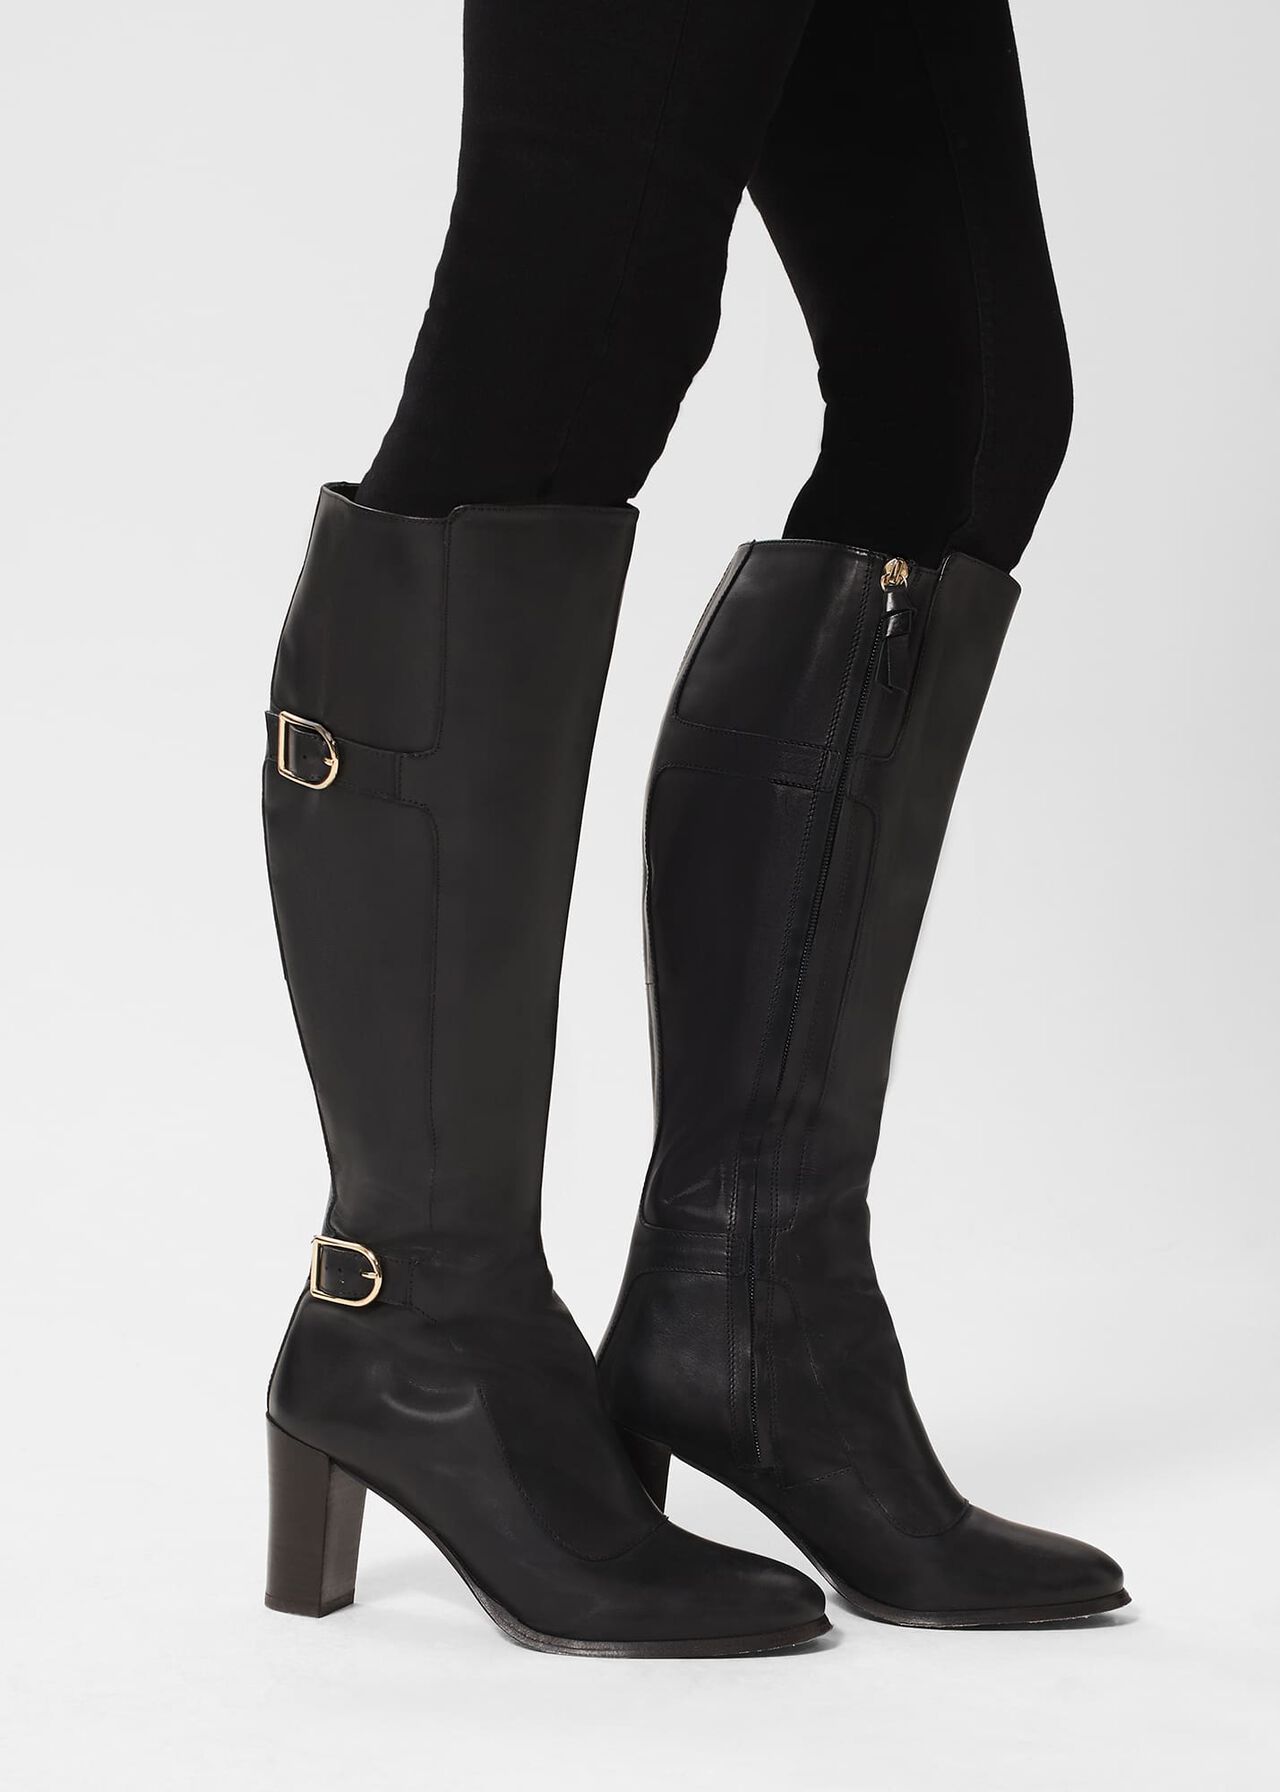 Nell Long Boot, Black, hi-res